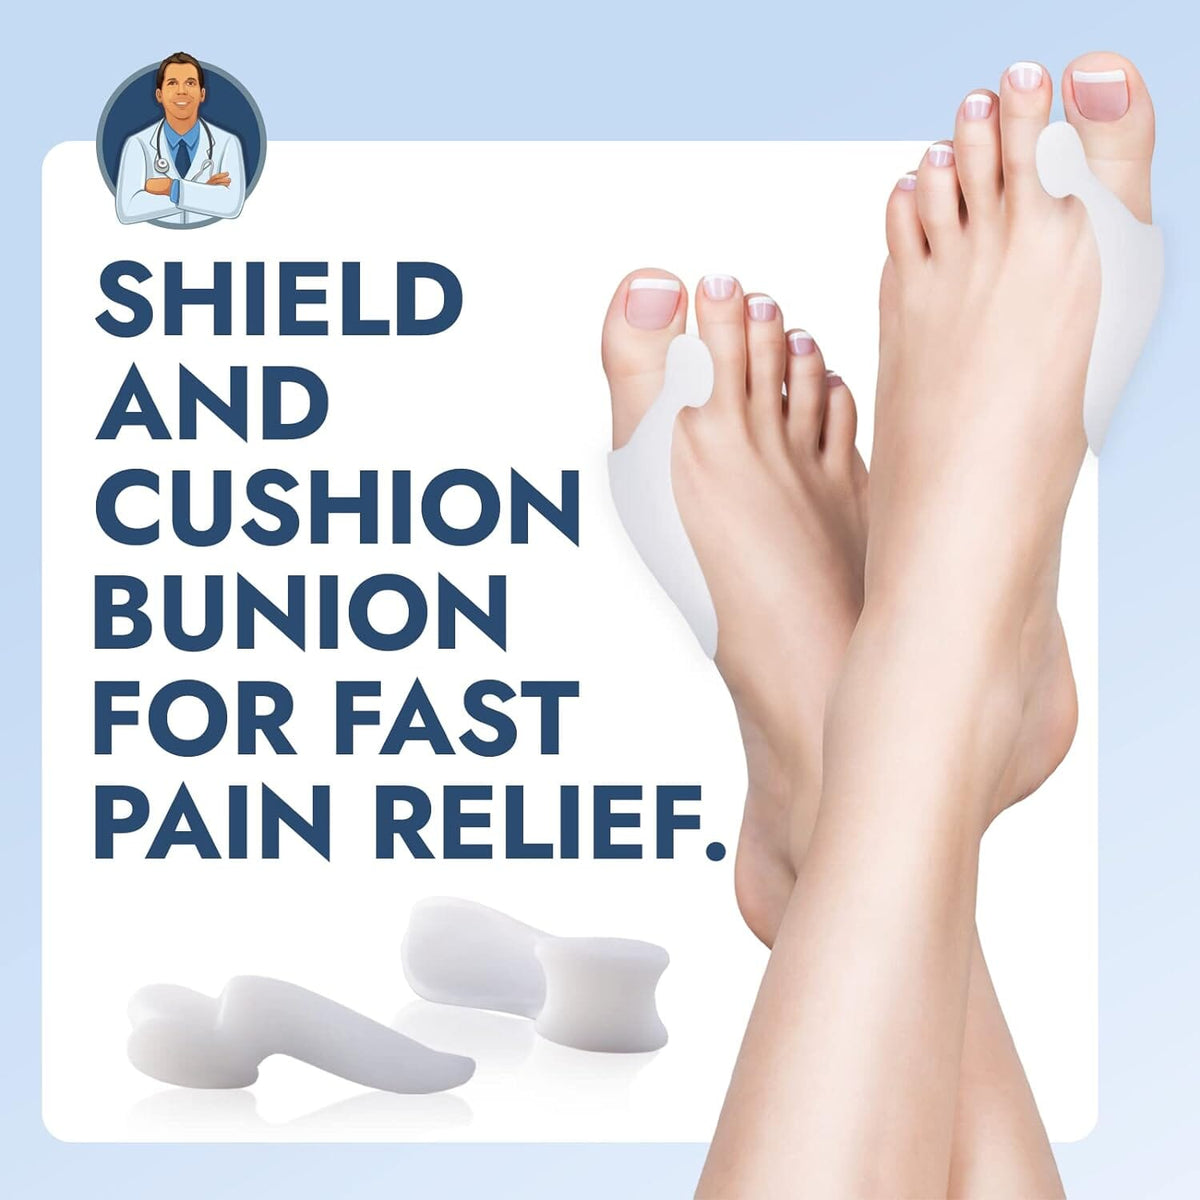 Dr. Frederick&#39;s Original Bunion Pad &amp; Spacer - 4pcs - Temporary Bunion Corrector - Toe Separator - Soft Gel Cushion - Bunion Shield - Wear with Shoes - Fast Bunion Pain Relief for Women &amp; Men Foot Pain Dr. Frederick&#39;s Original 